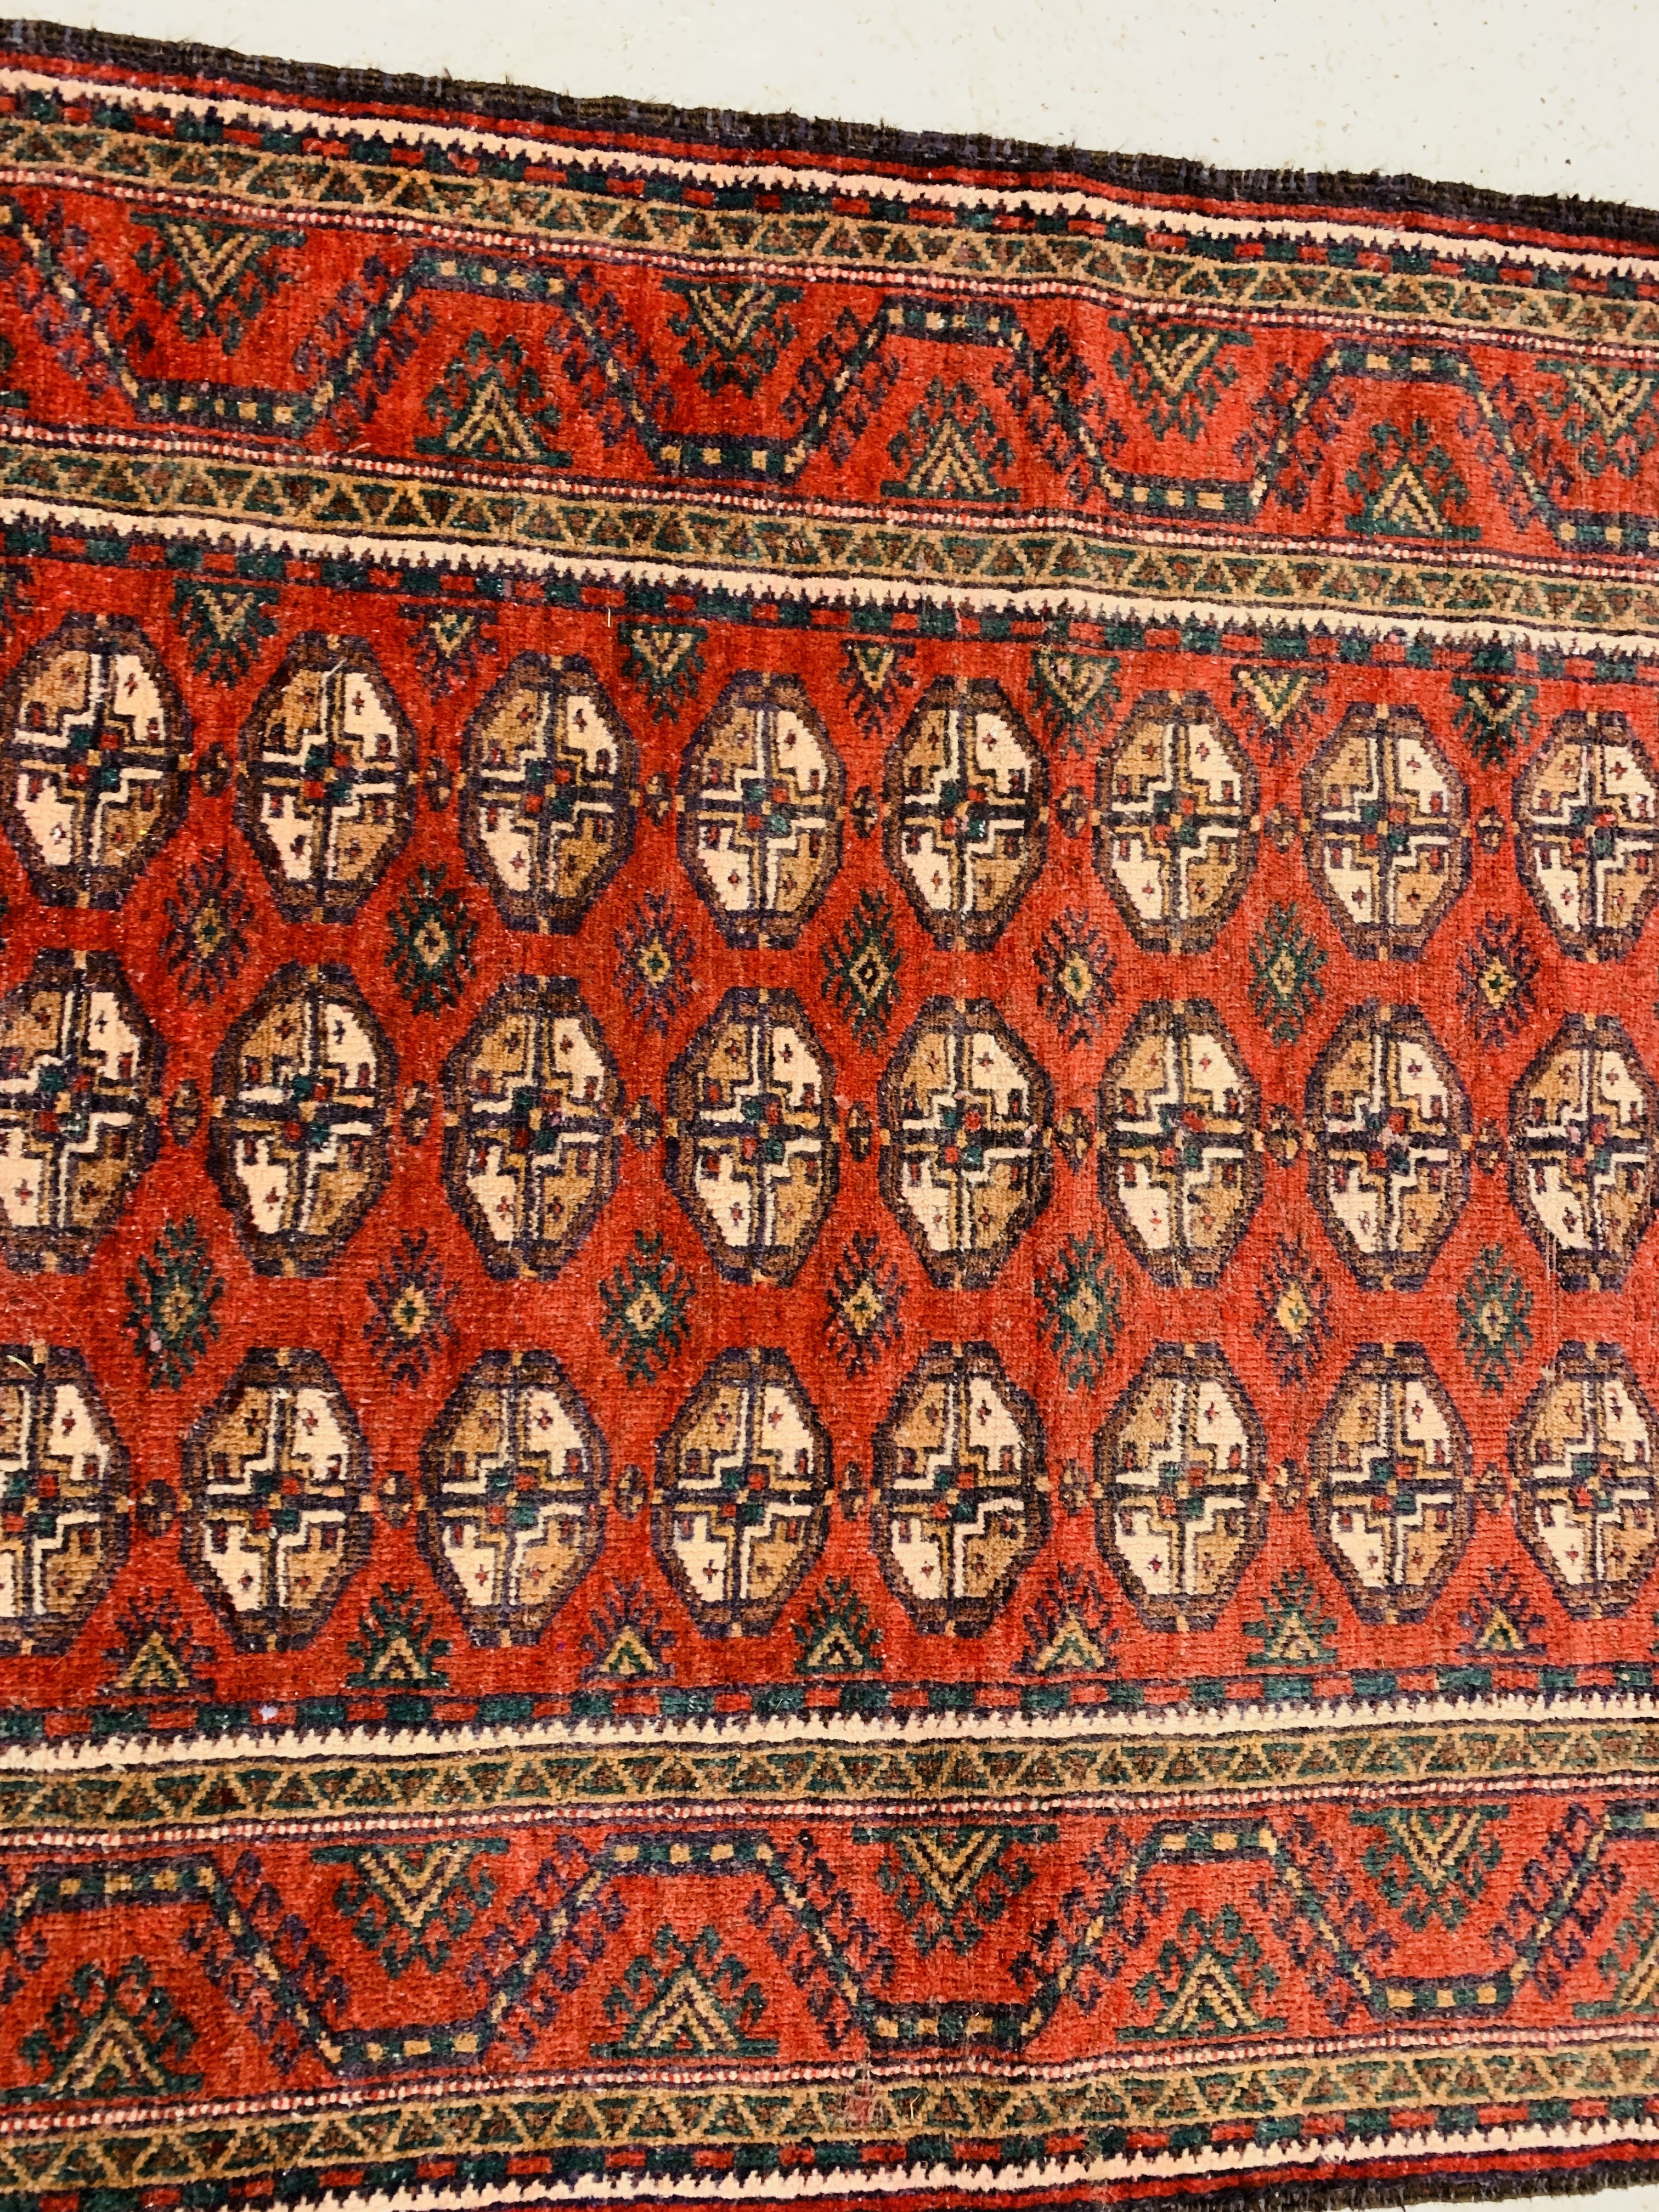 A BALUCHI RED AND BLUE PATTERNED CARPET 2.25 x 1.02. 1. - Image 3 of 4